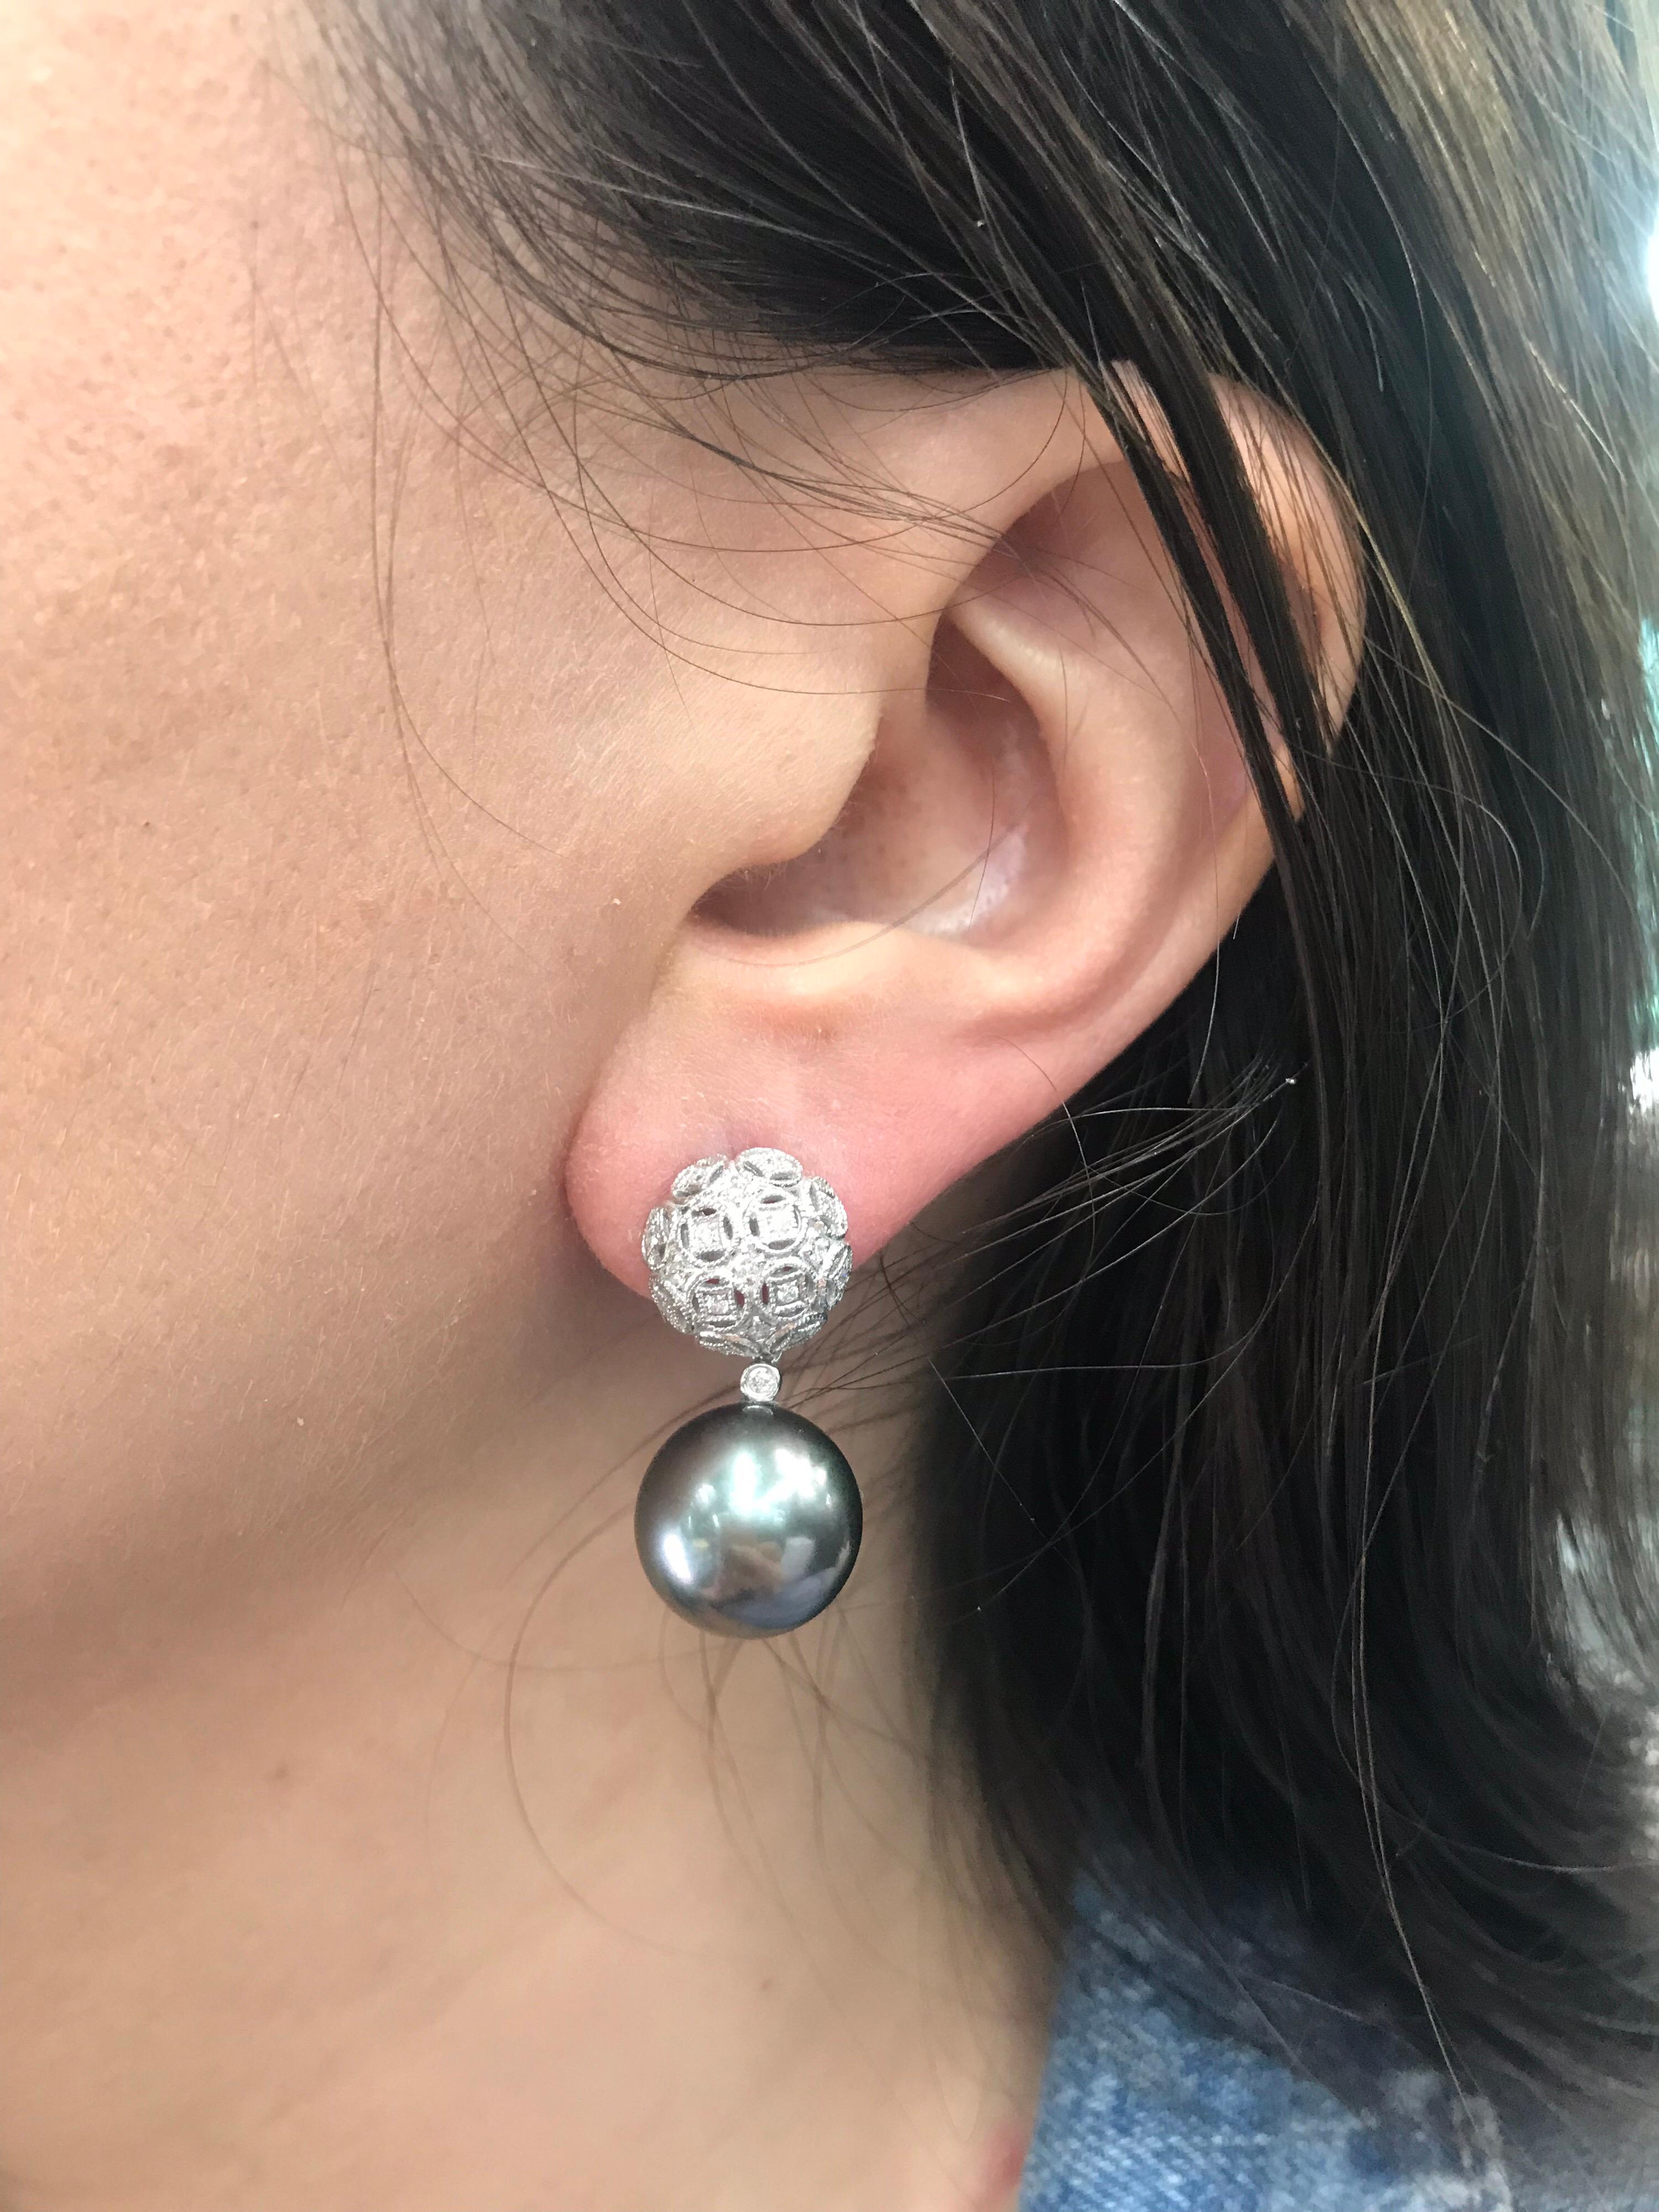 18K White gold drop earrings featuring two Tahitian pearls measuring 13-14 mm and round brilliants weighing 0.30 carats. 